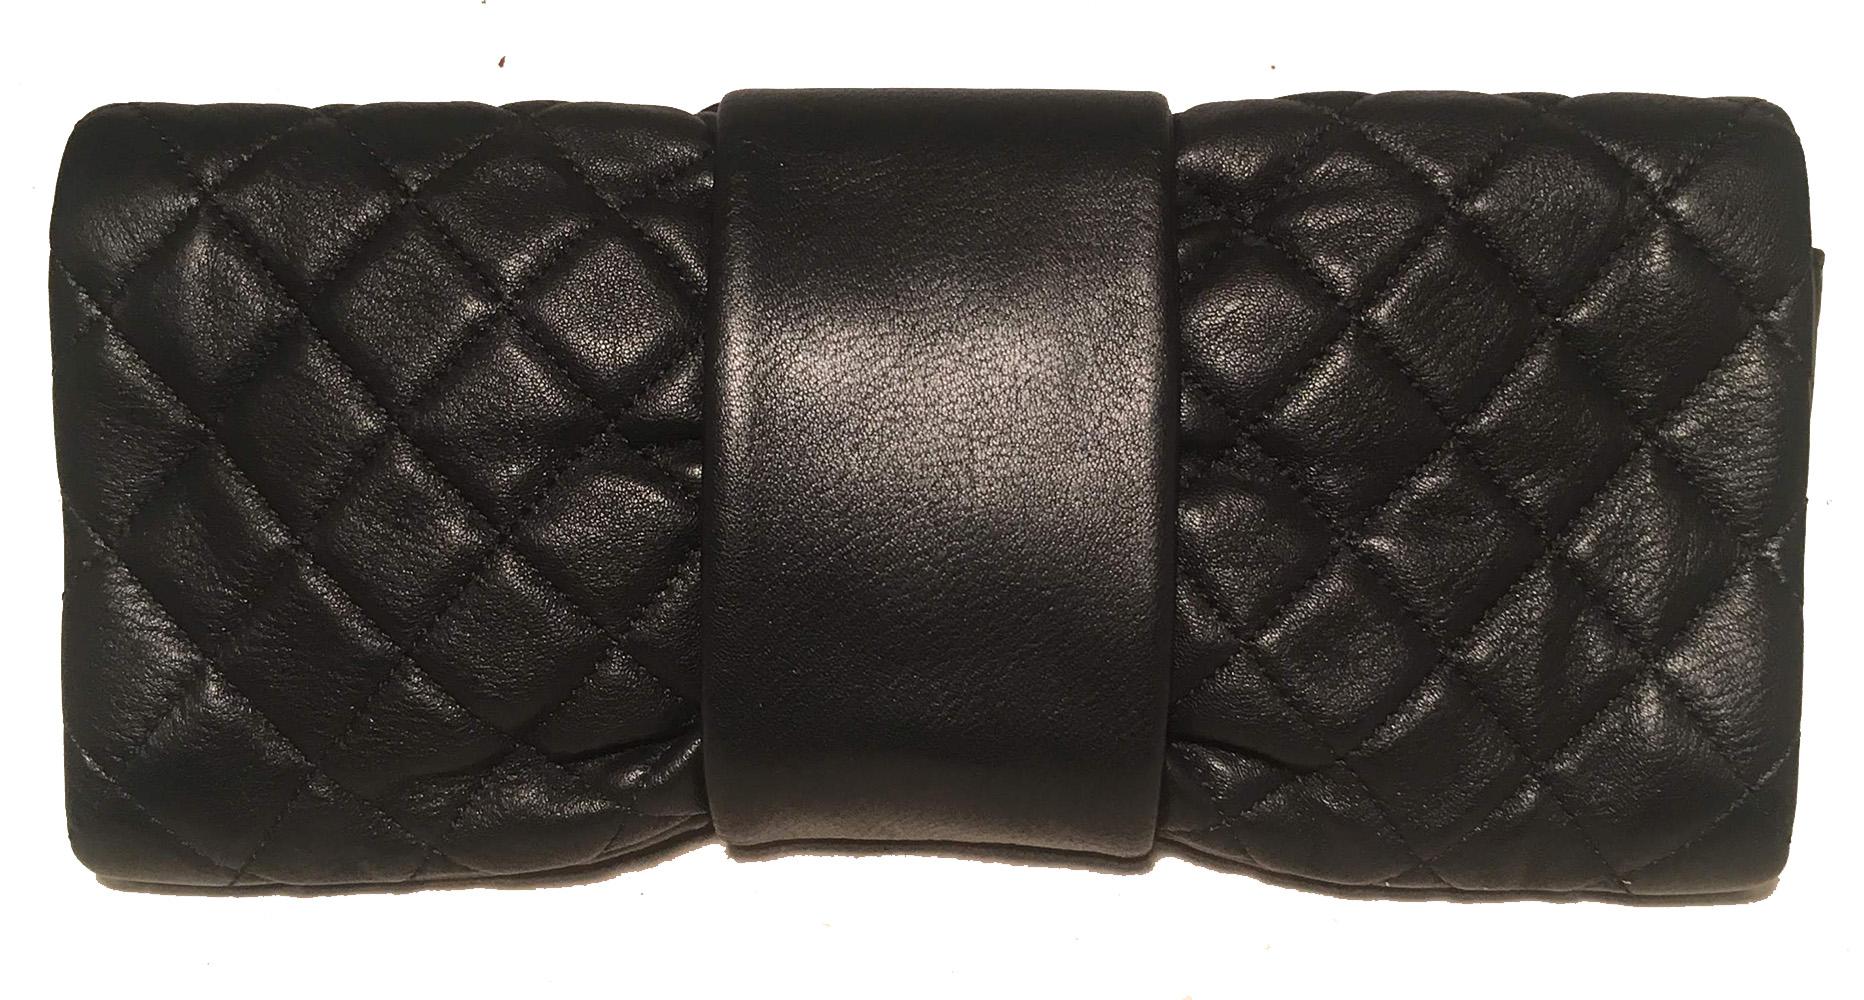 Chanel Black Quilted Sheepskin Leather 2.55 Reissue Mademoiselle Clutch in excellent condition. Black diamond quilted soft sheepskin leather exterior trimmed with a front twist mademoiselle style closure in antiqued bronze. Black silk interior with